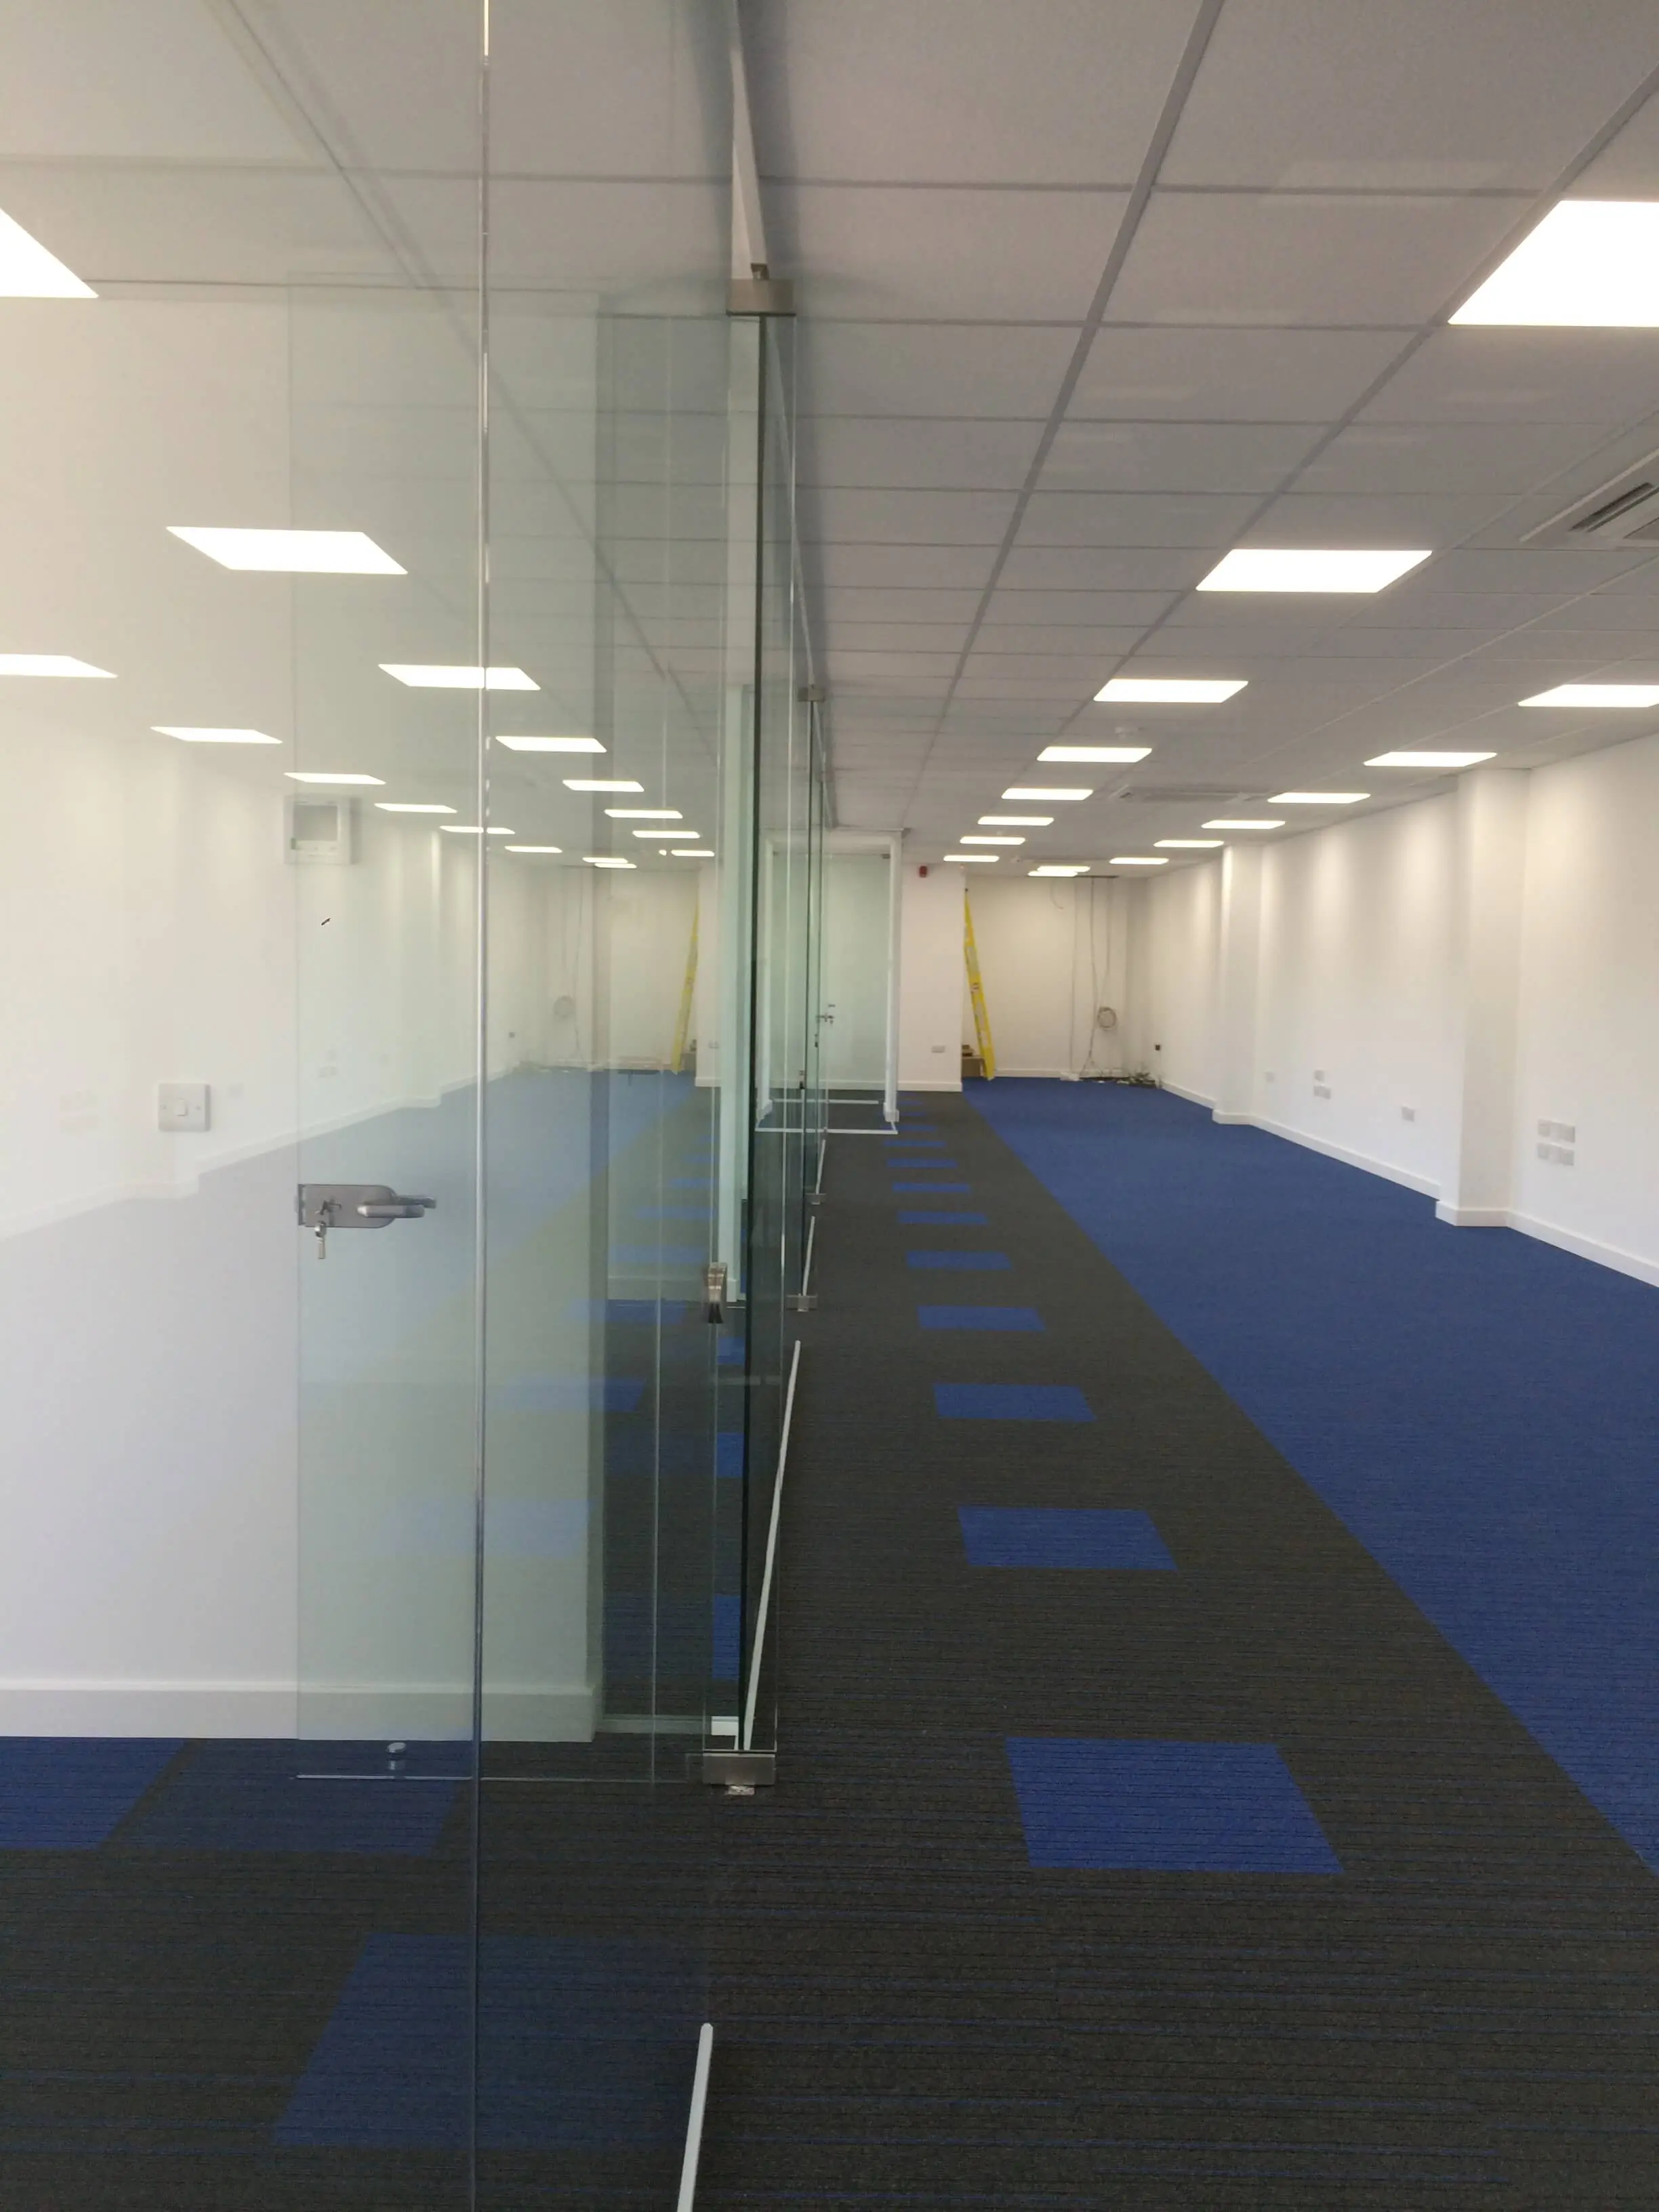 Large office space with glass partitions and lighting